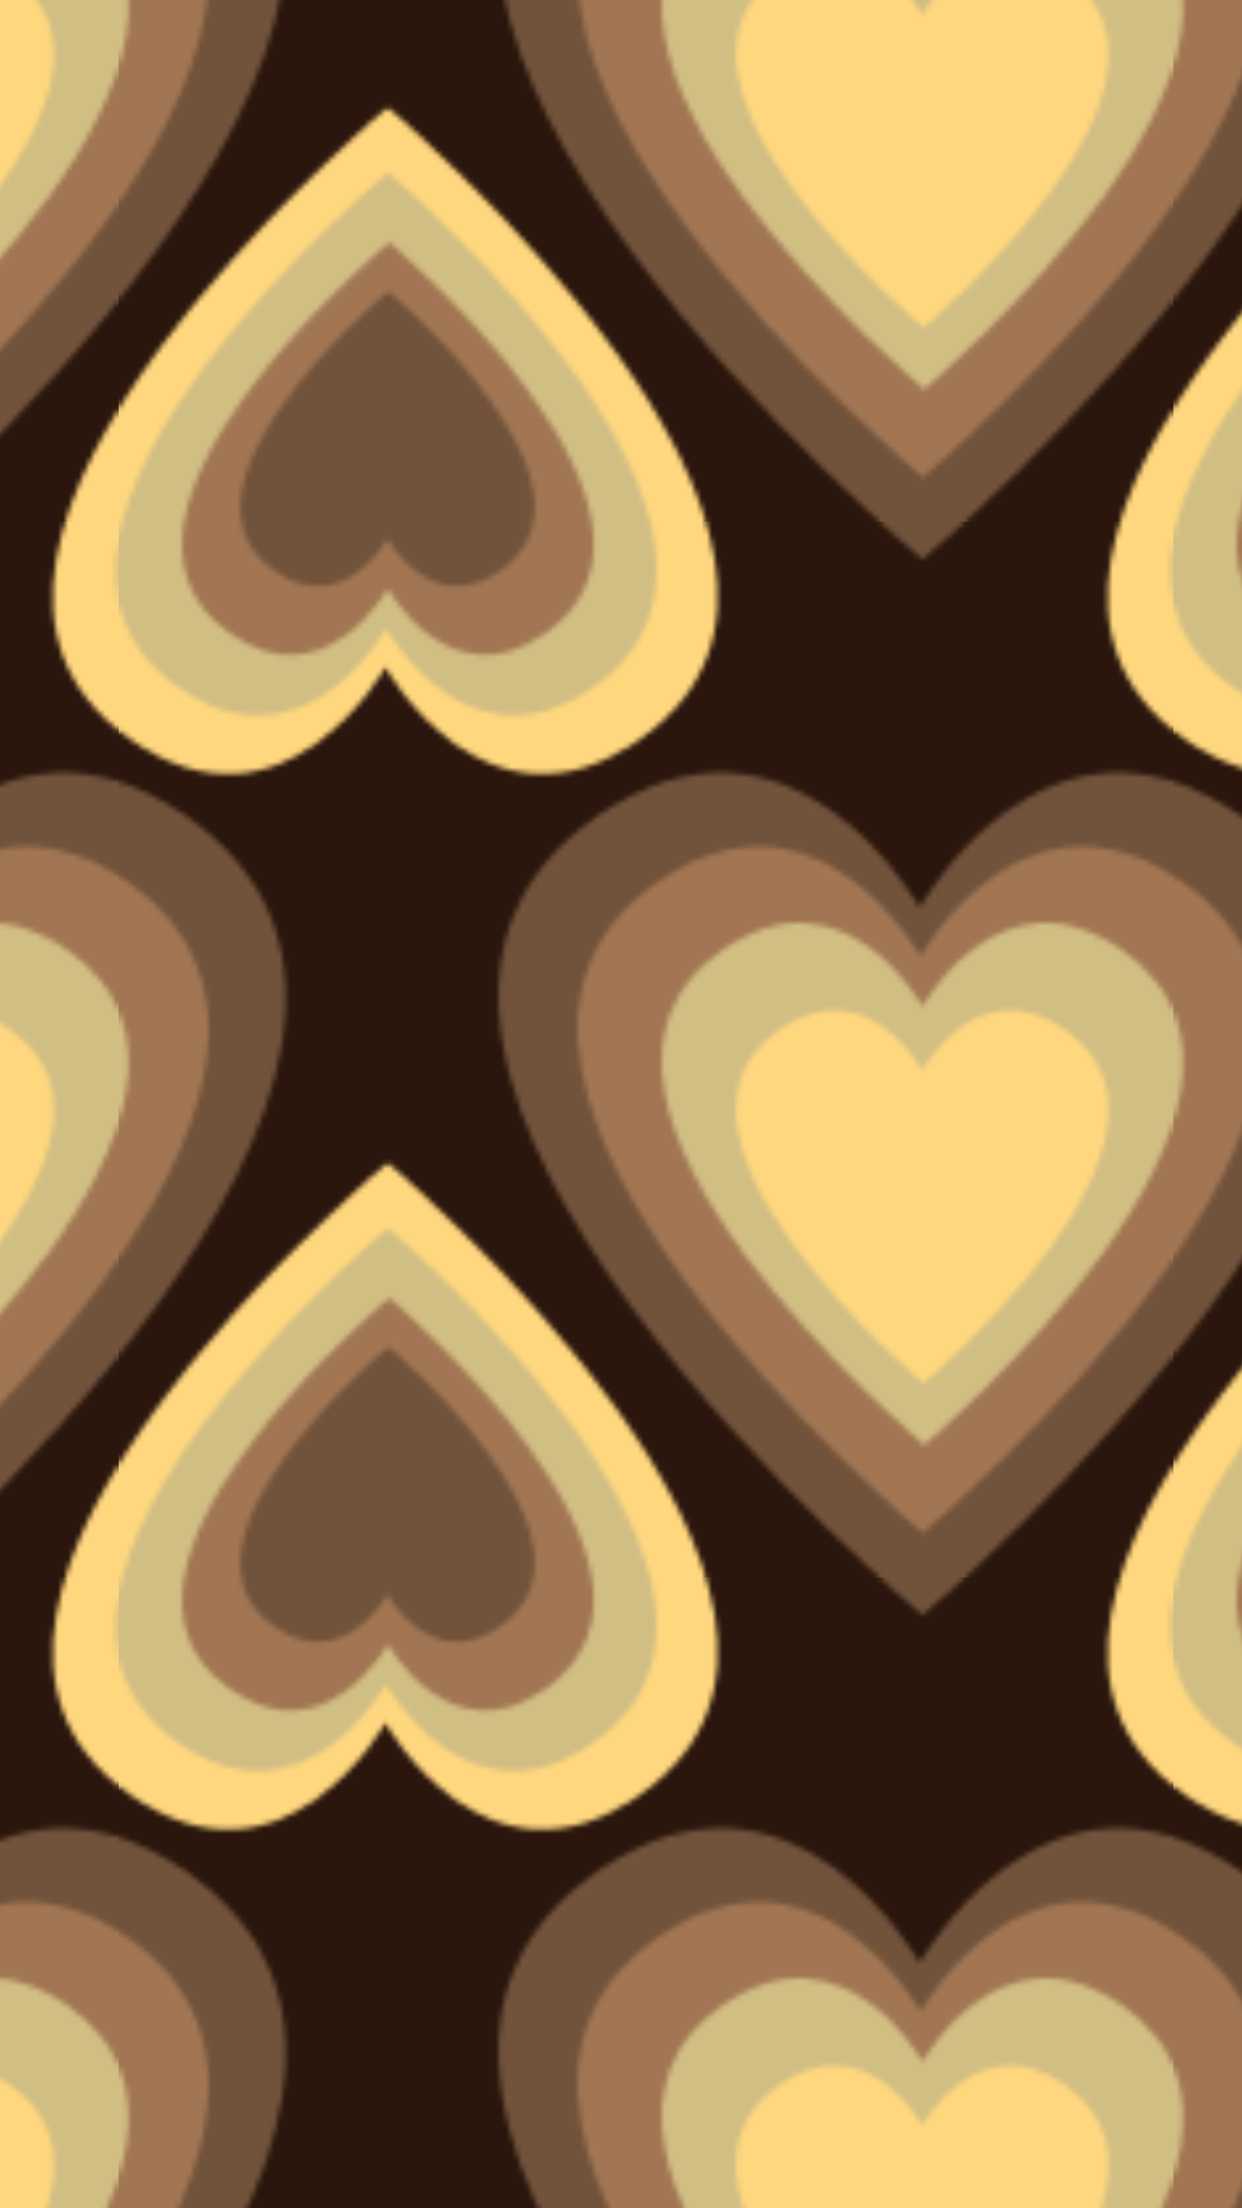 Free Downloadable Brown Heart Wallpaper For Phone and Computer